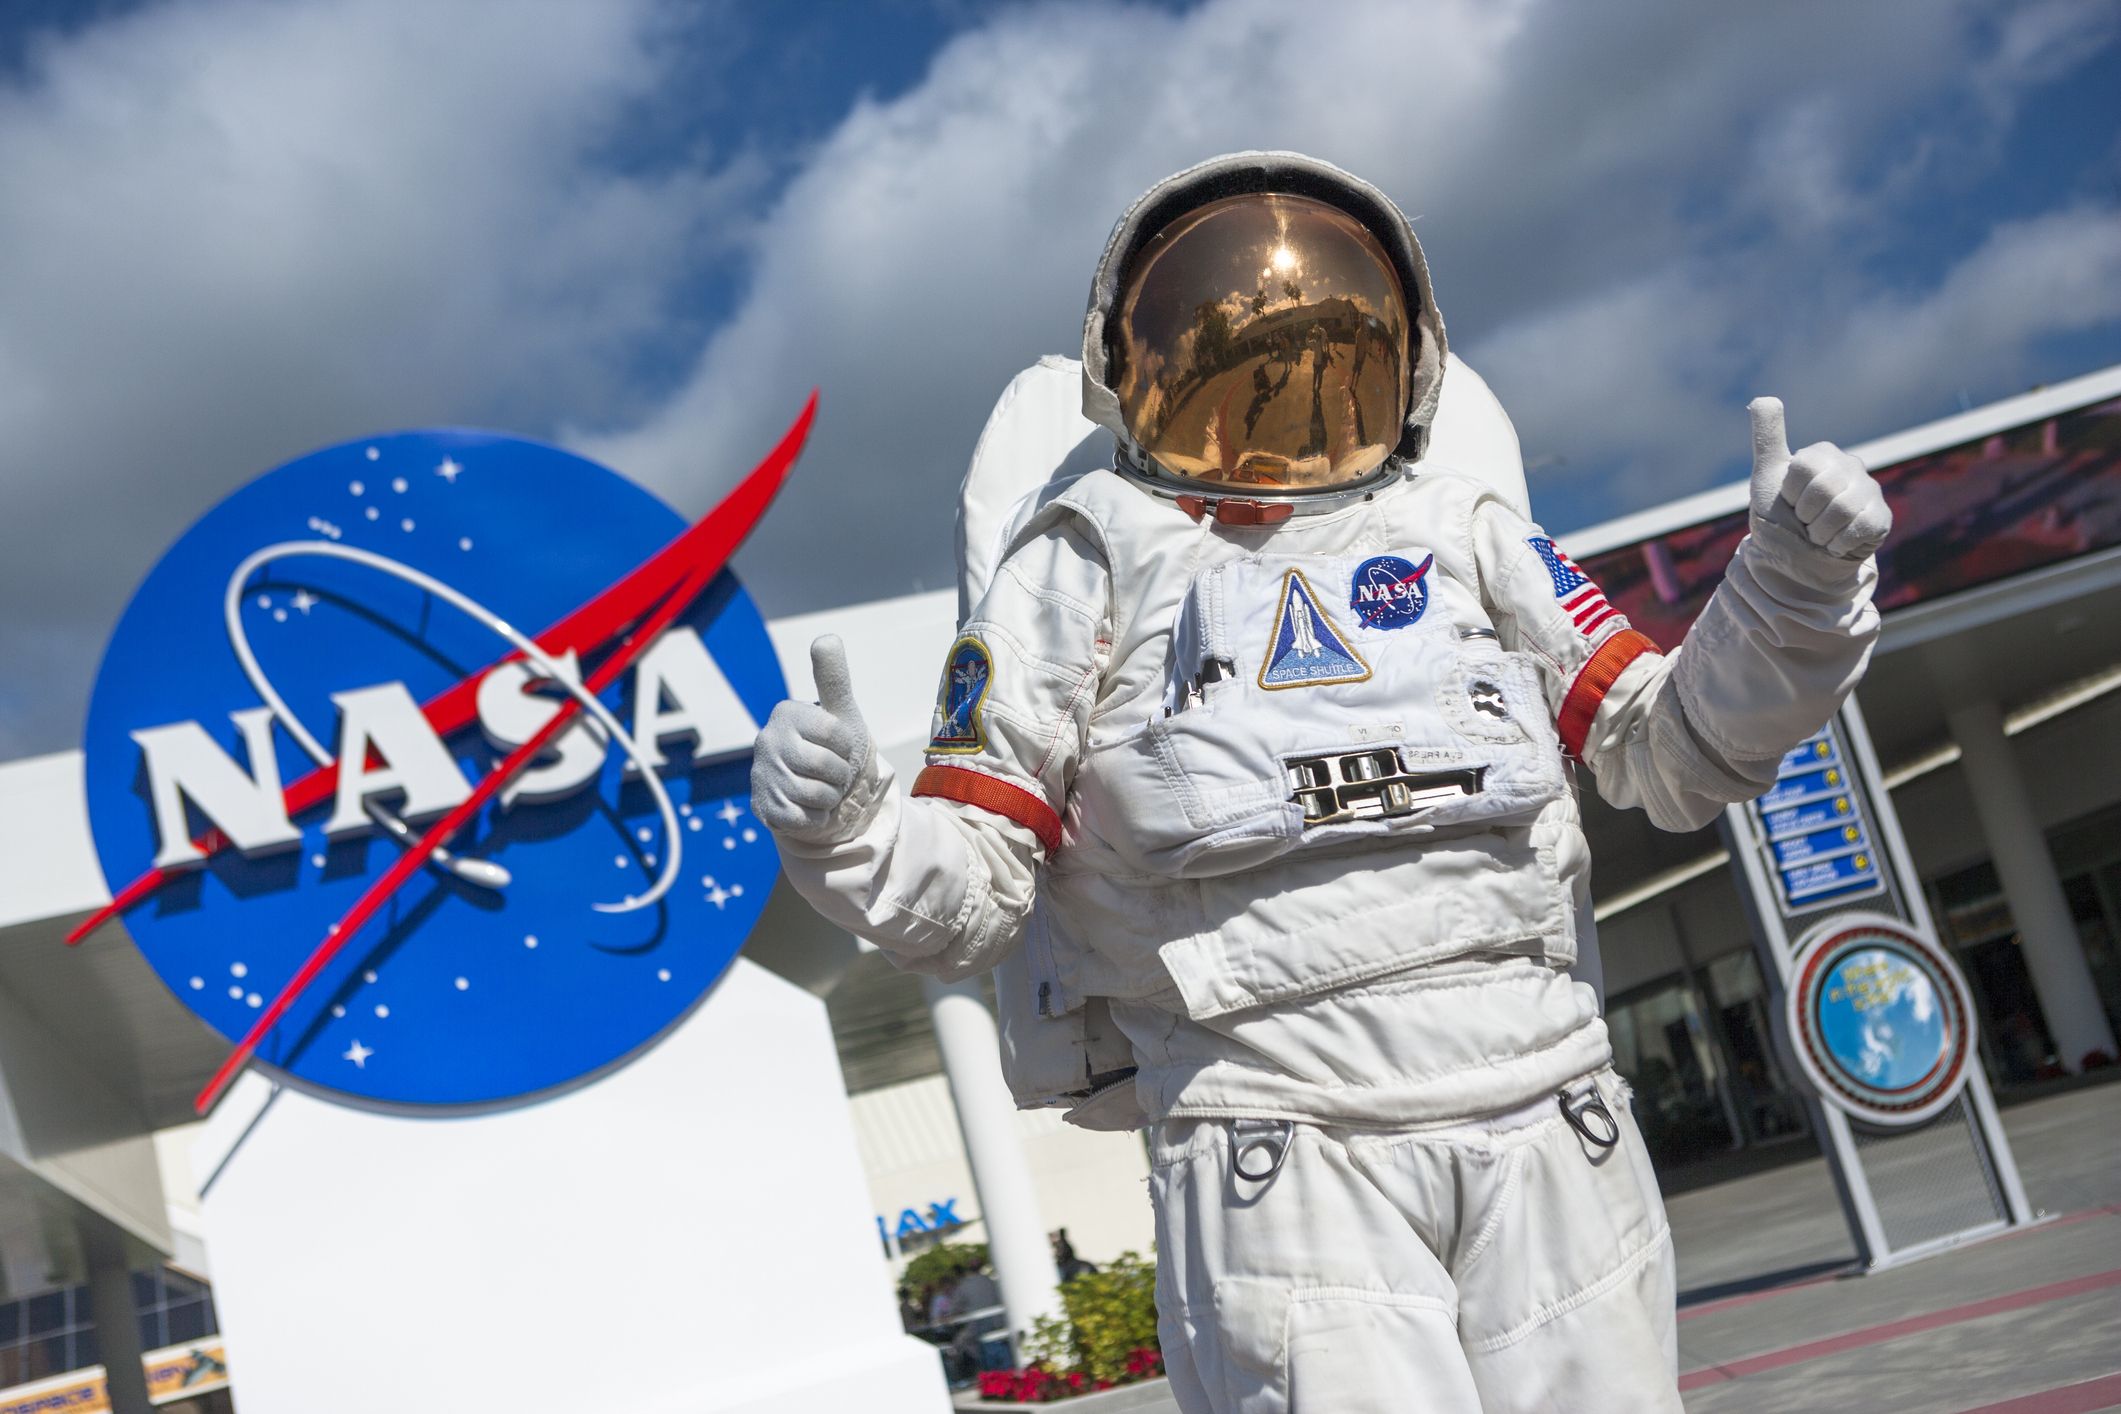 Want To Be a NASA Astronaut? Now's Your Chance.